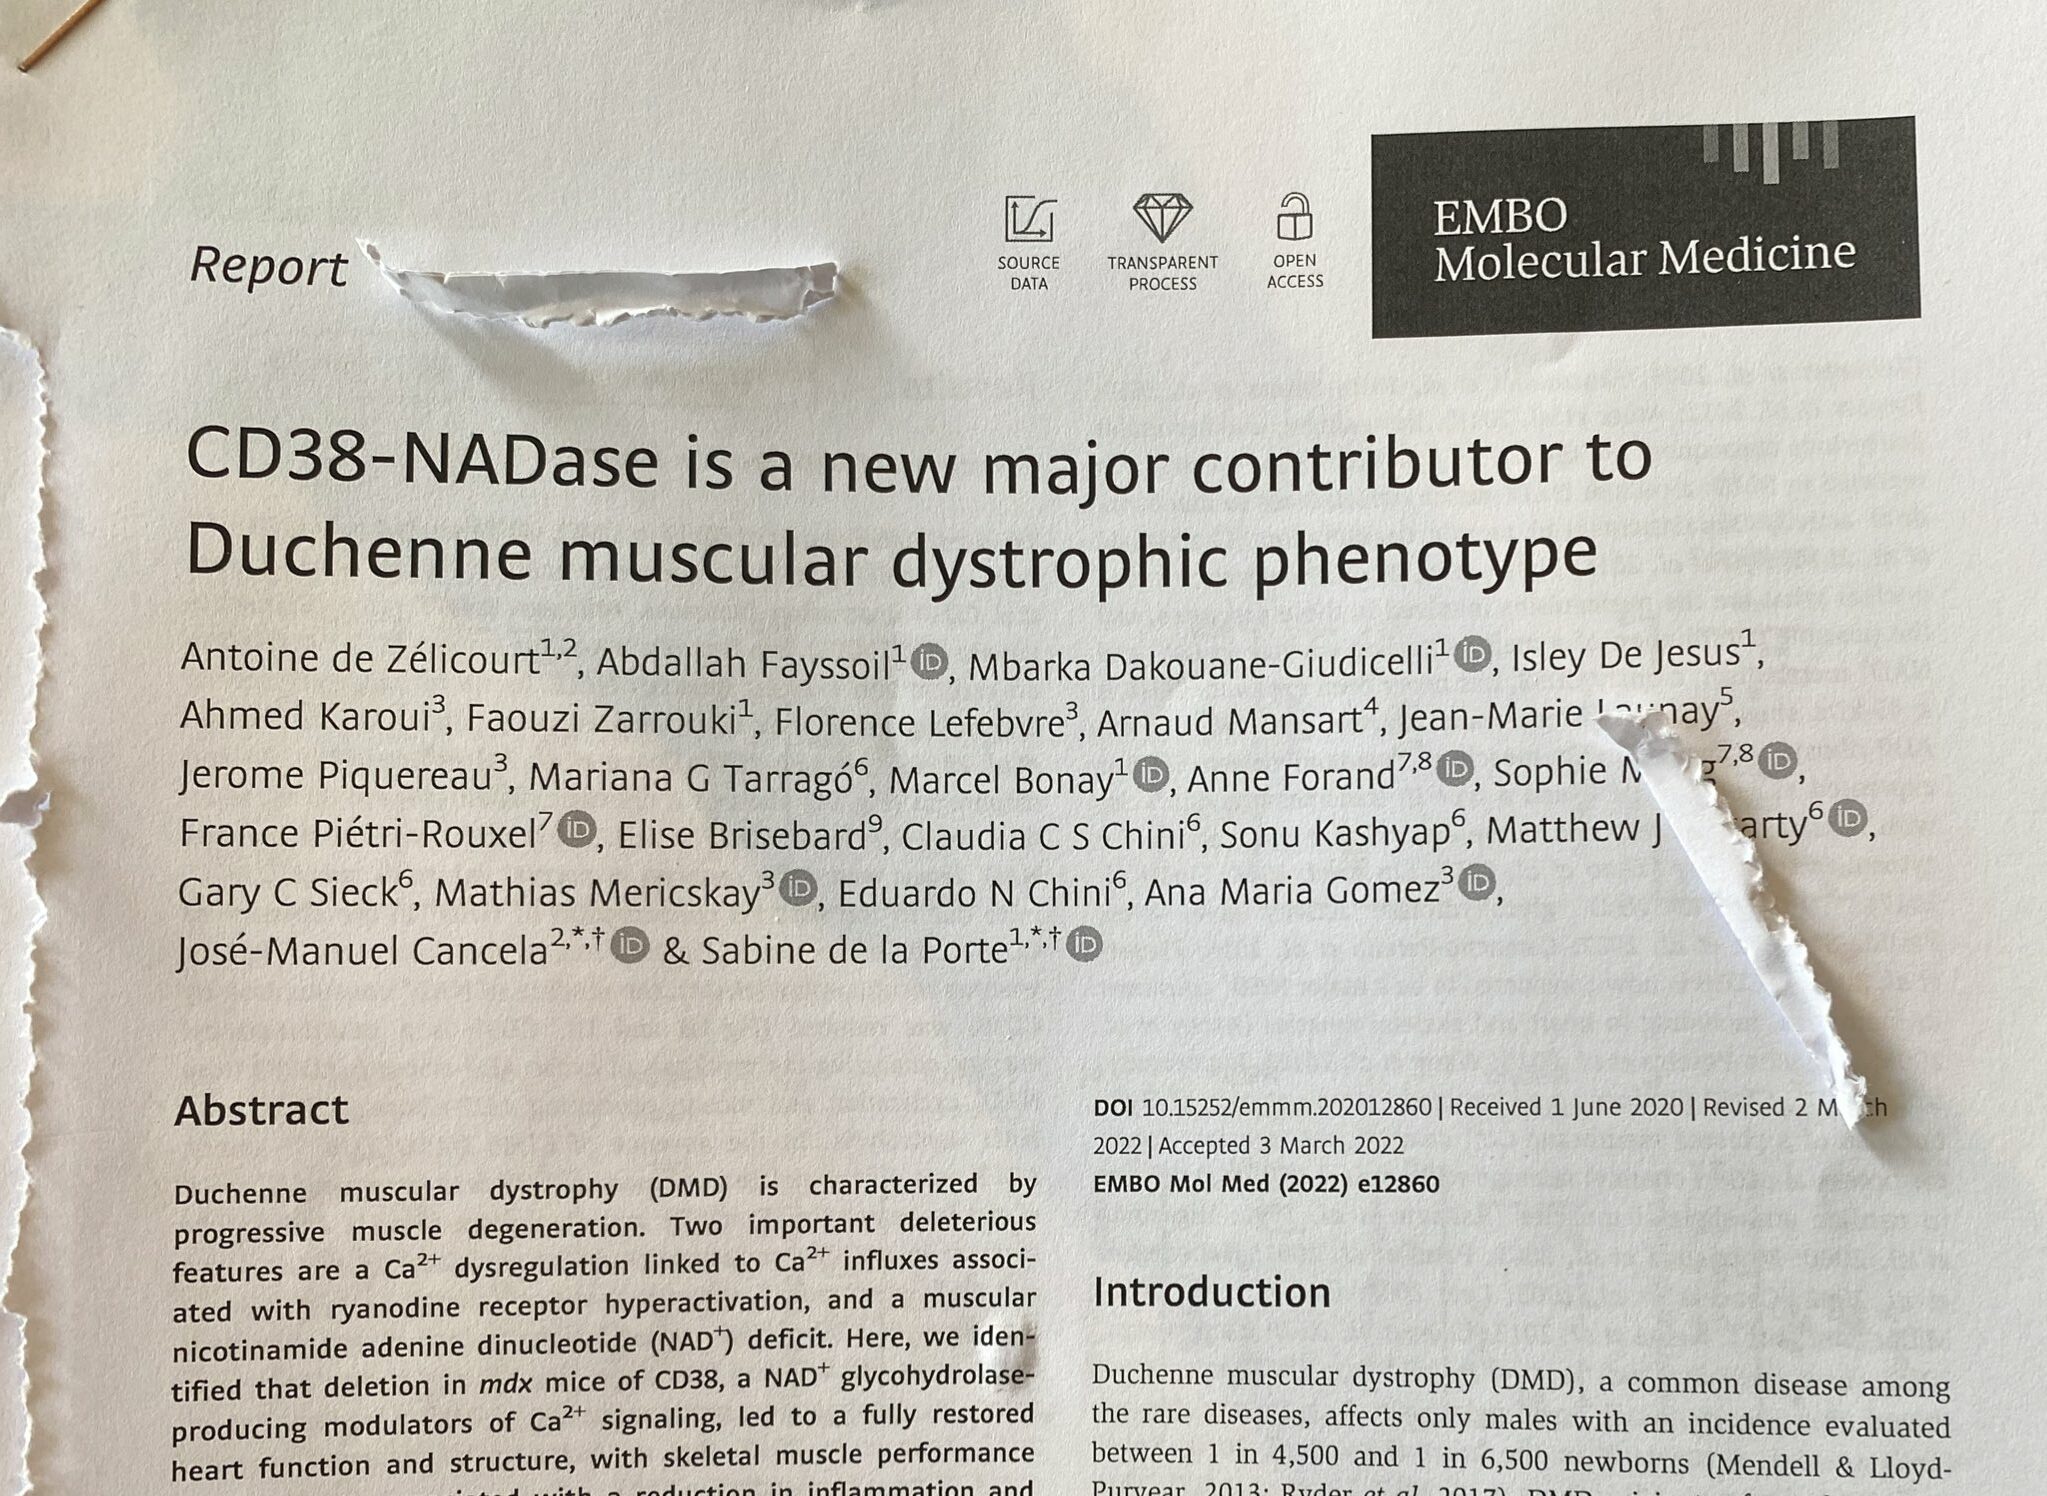 CD38-NADase is a new major contributor to Duchenne muscular dystrophic phenotype.